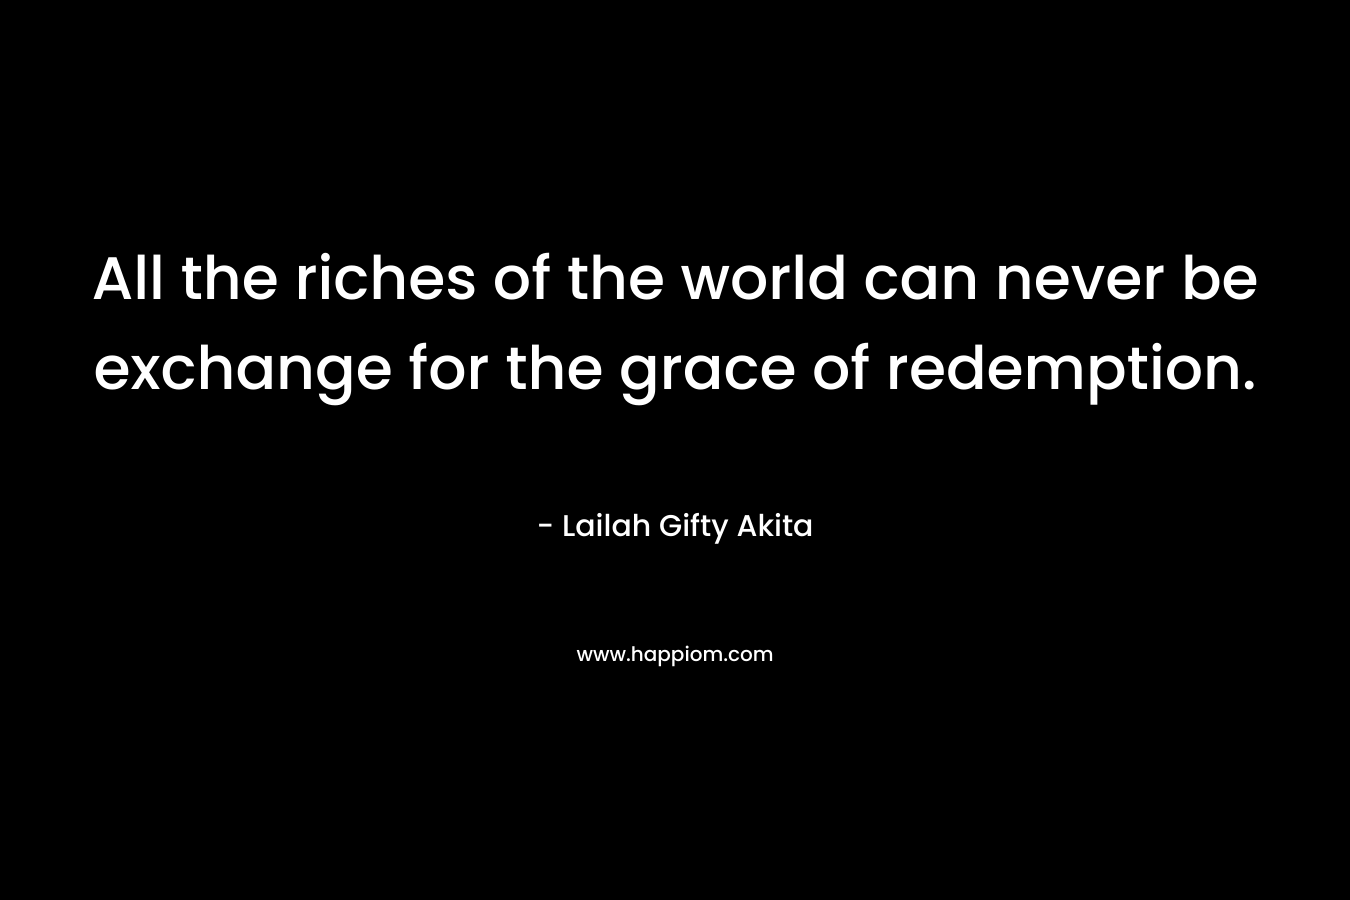 All the riches of the world can never be exchange for the grace of redemption.